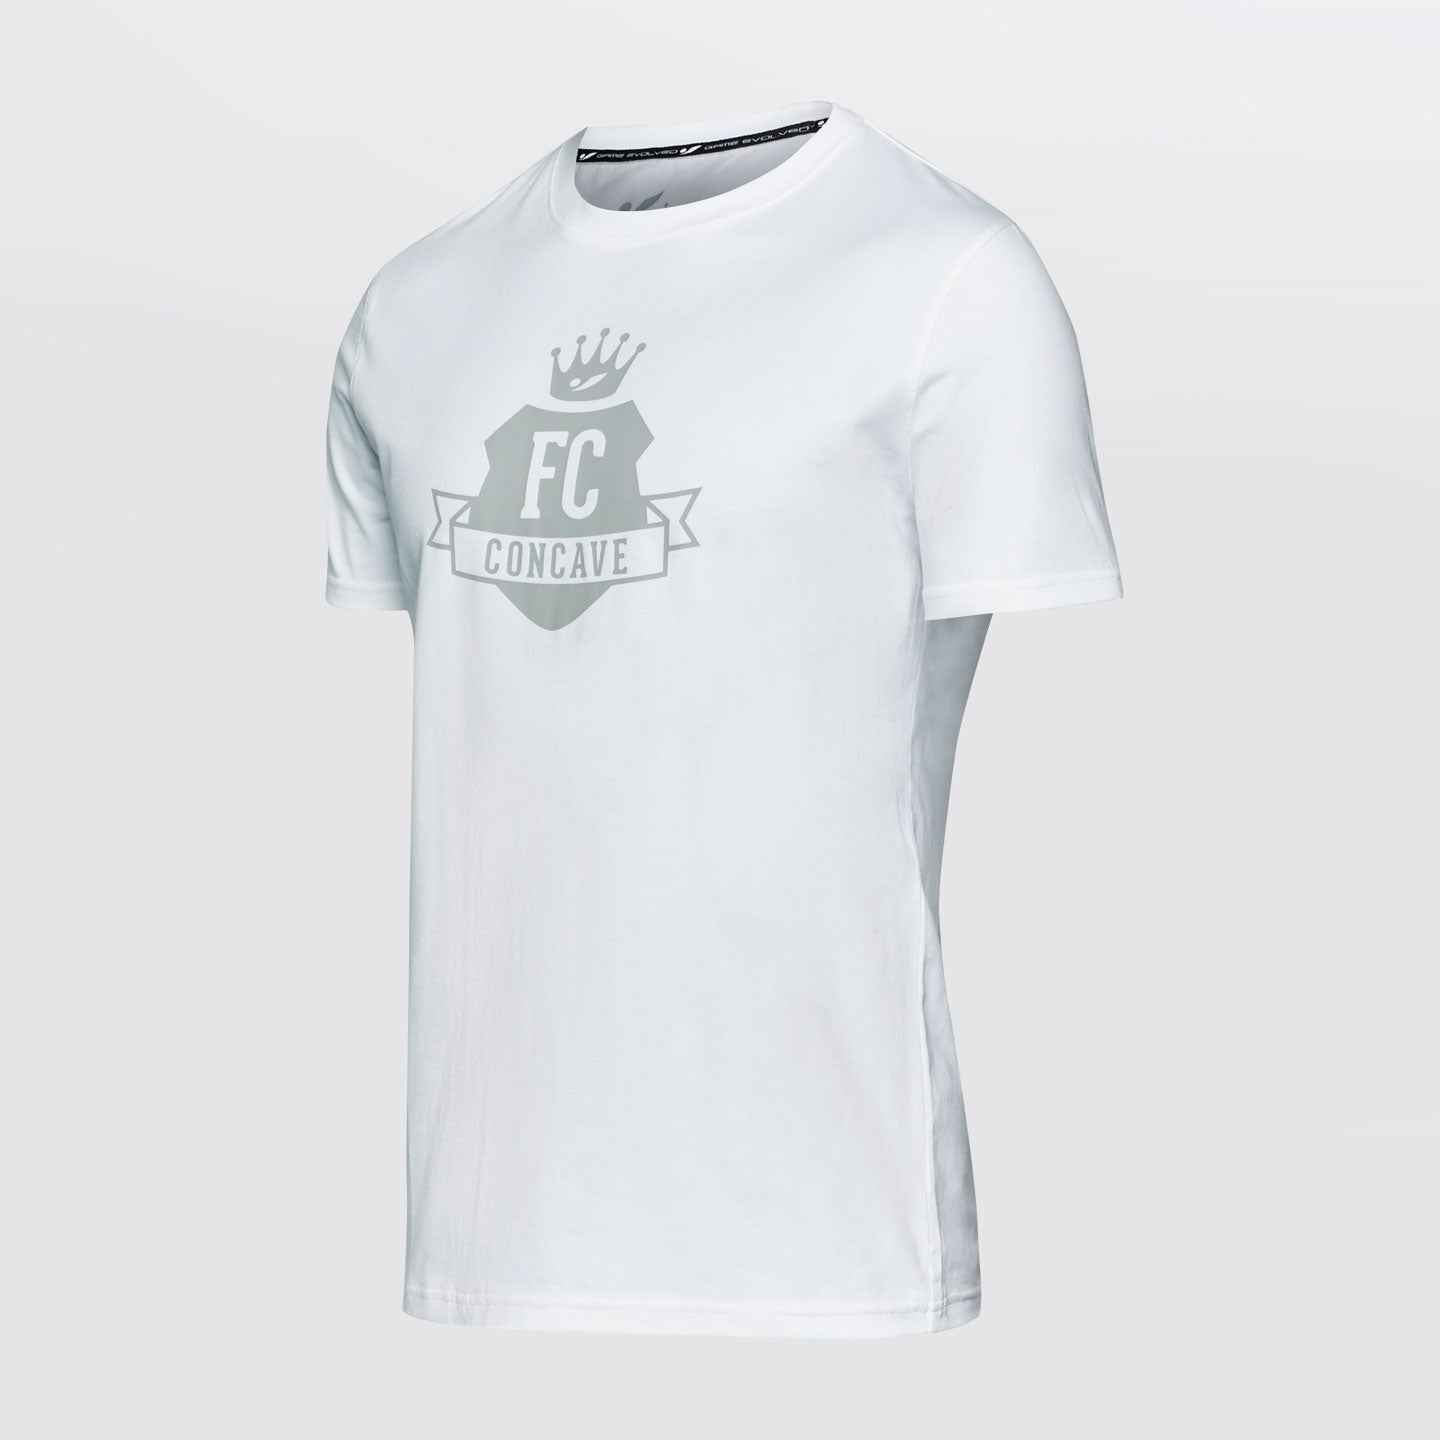 Concave T-Shirt - White/Grey 15.1